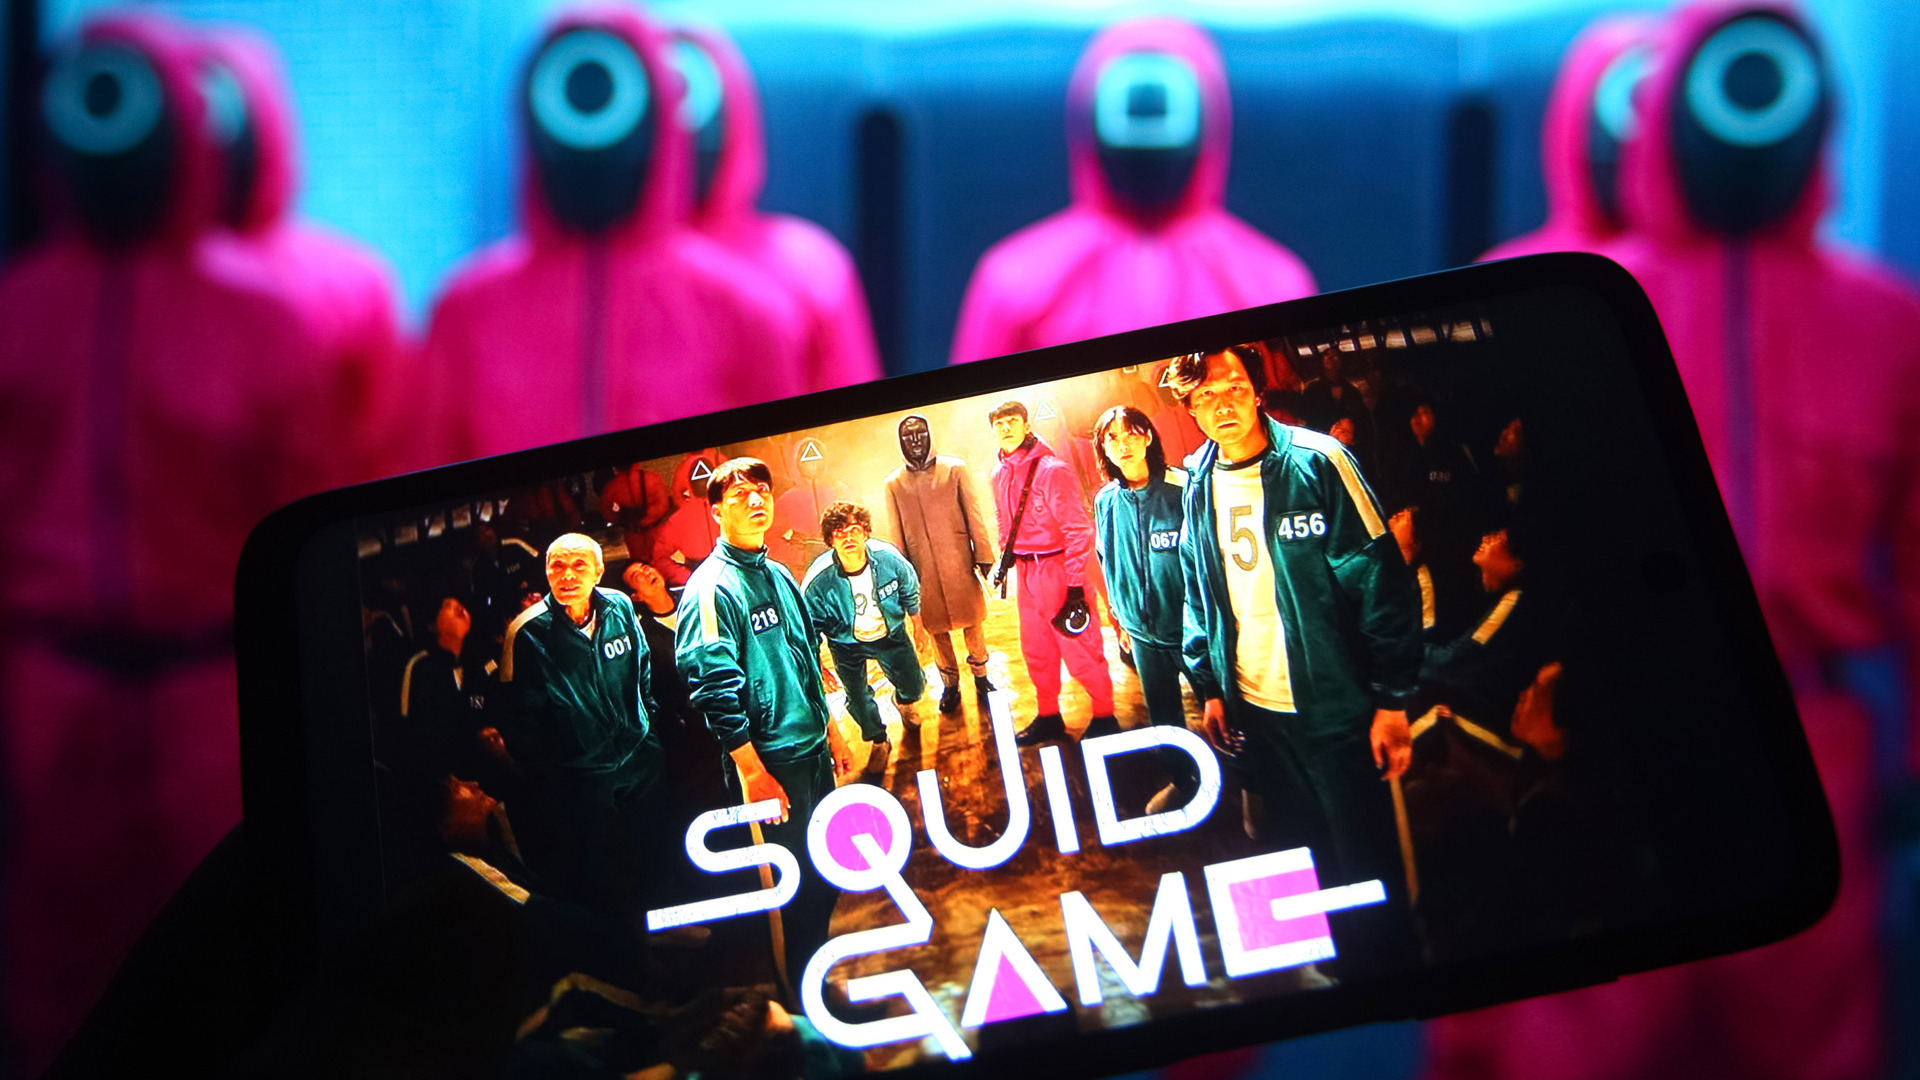 what happened with squid game crypto